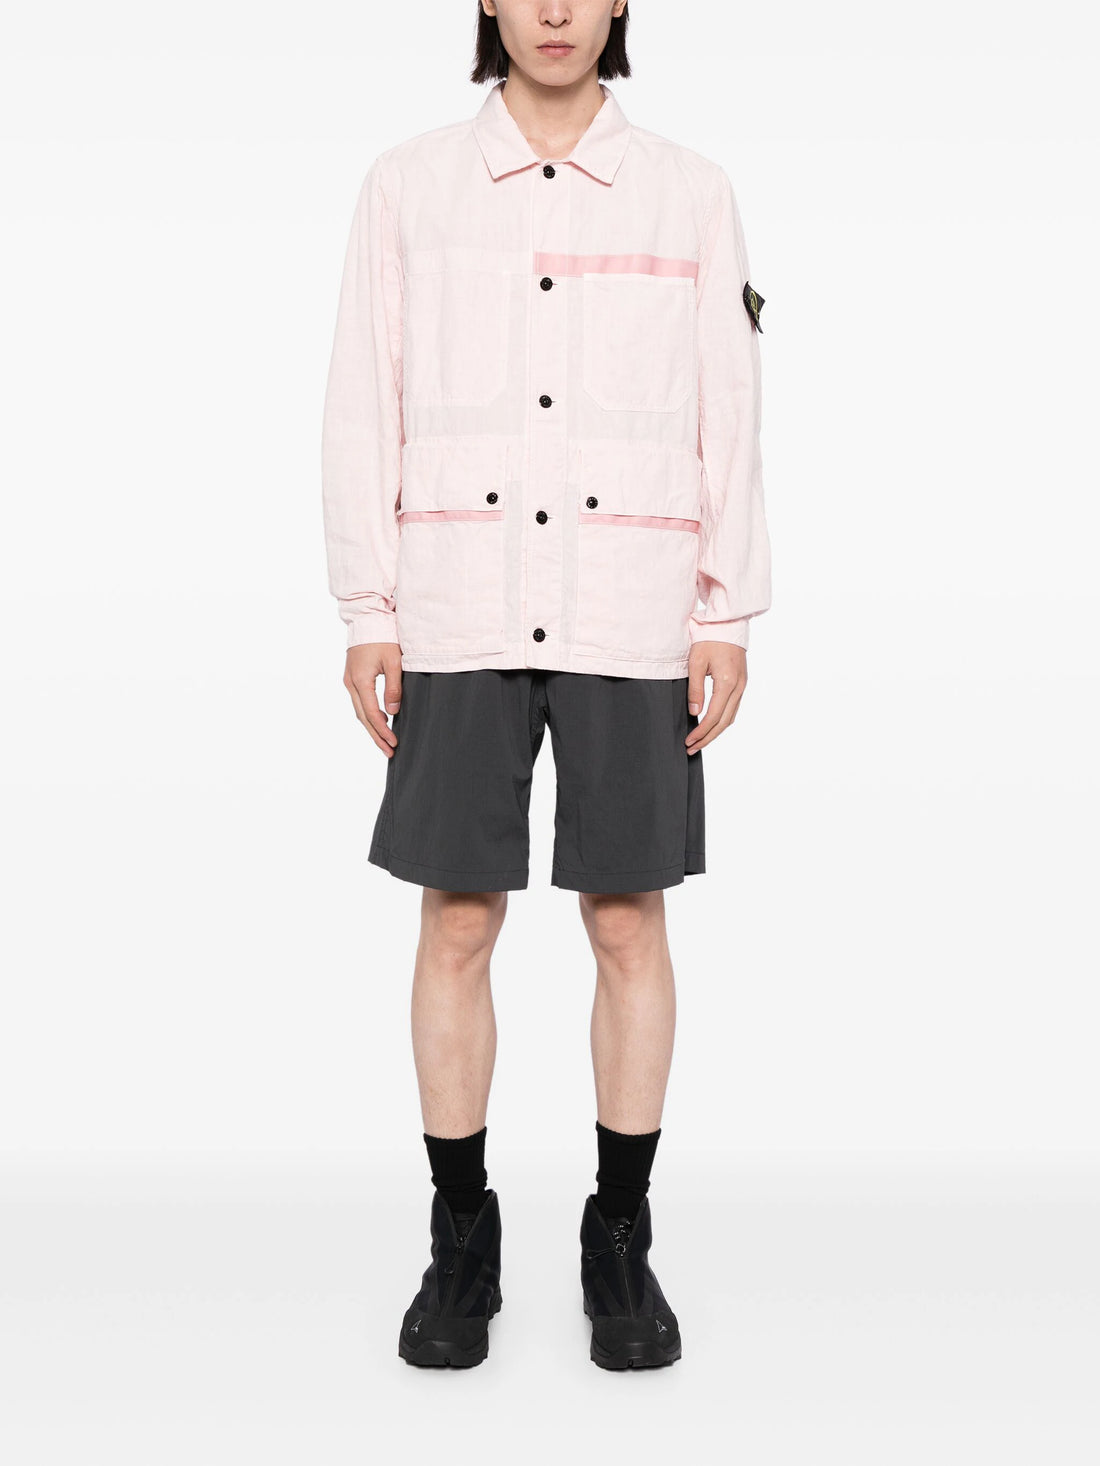 STONE ISLAND Compass-Badge Buttoned Shirt Jacket Pink